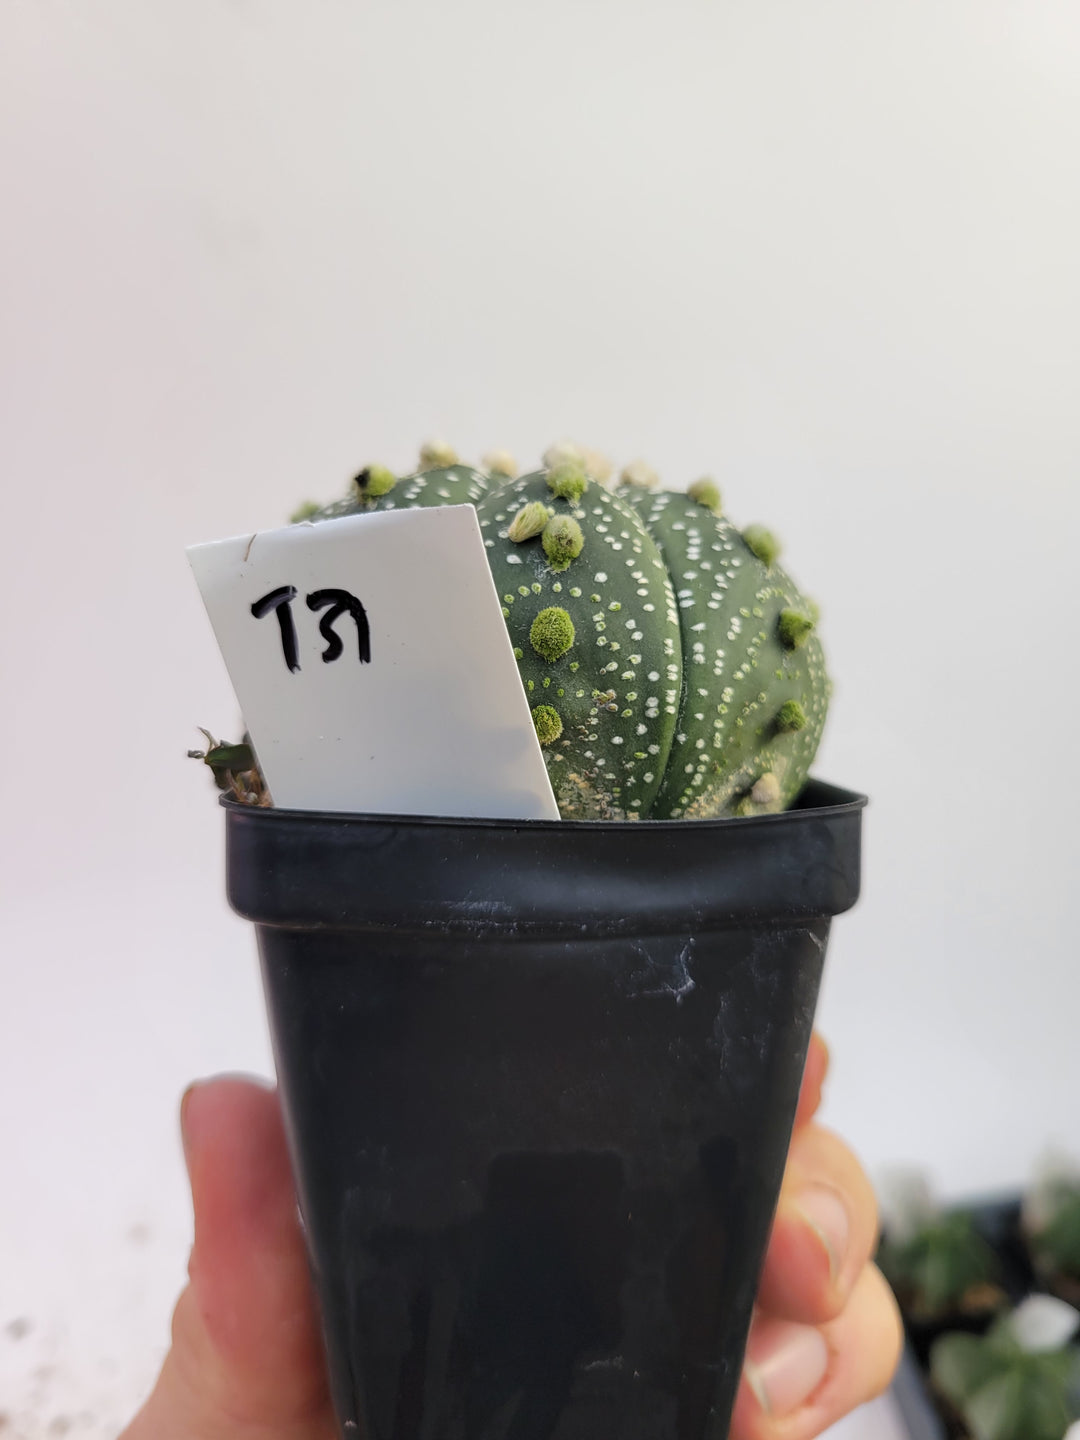 Astrophytum asterias cv. Superkabuto, rooted and established Deaw Cactus- Flowering Seed Grown#T31 - Nice Plants Good Pots